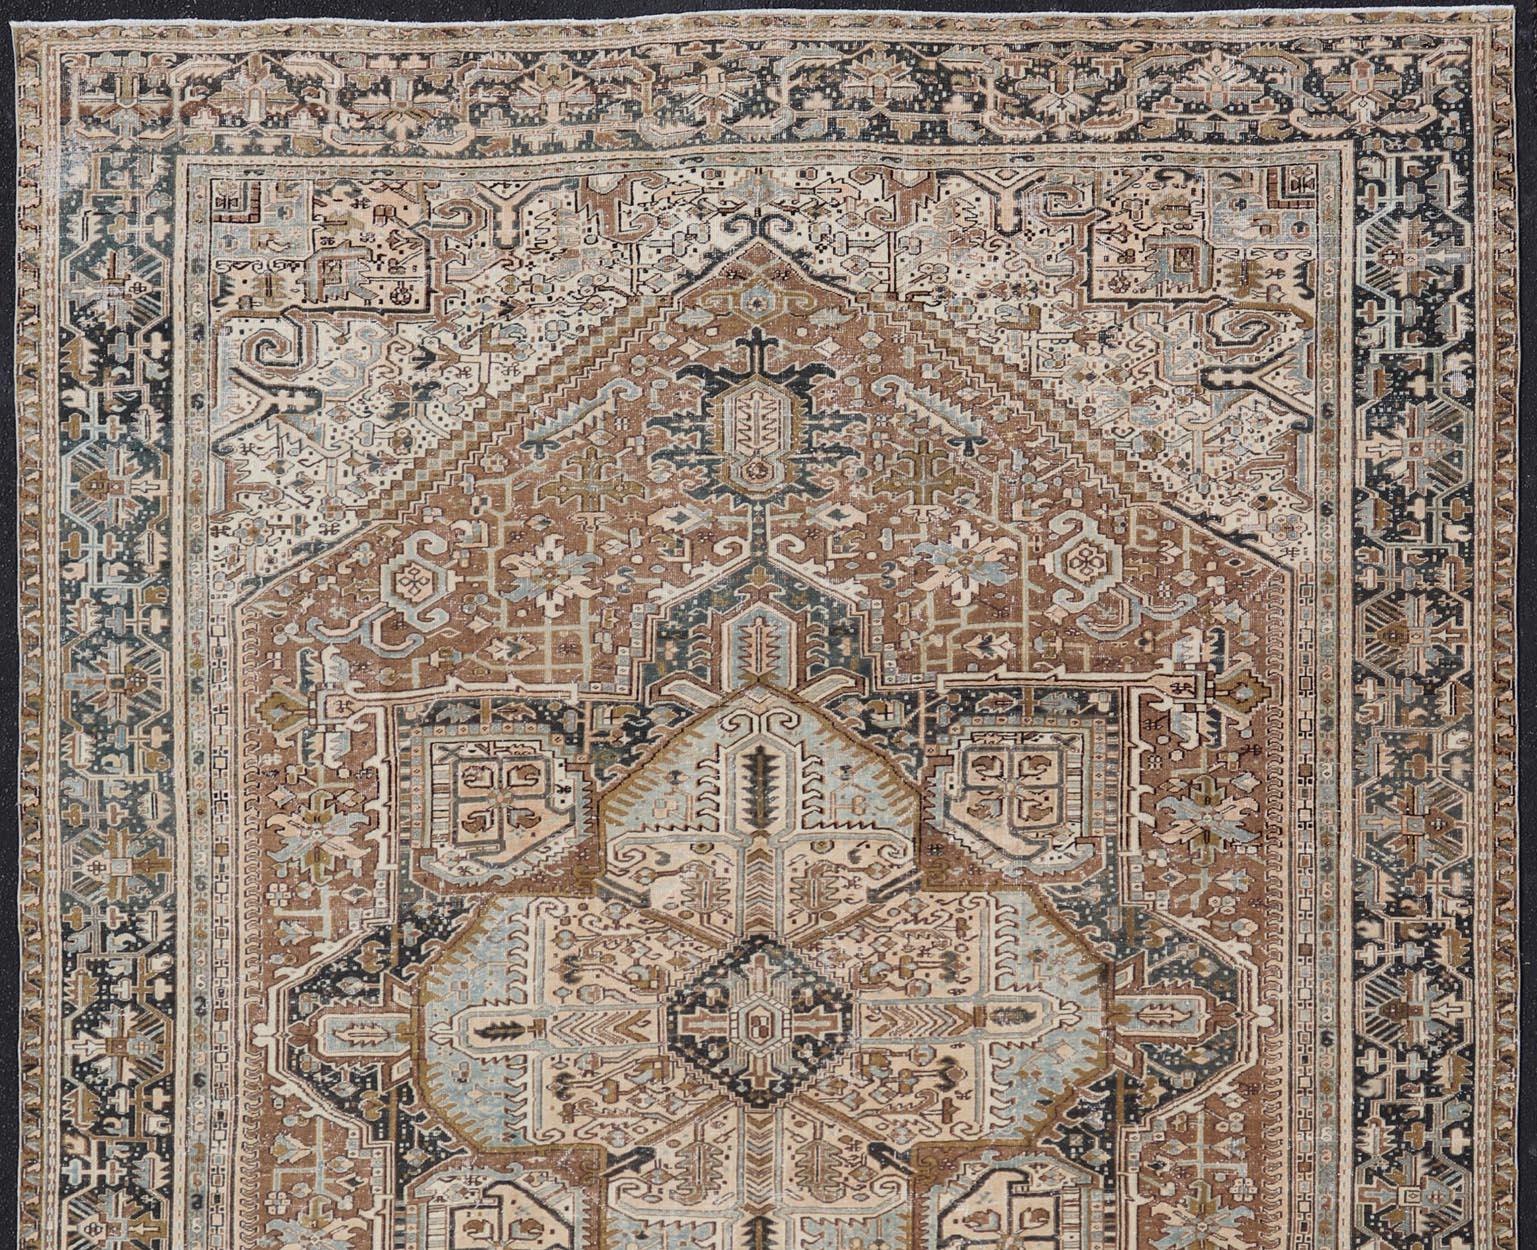 Persian Antique Heriz Rug with Geometric Design in Blue's, Tan, Cream, and Brown For Sale 2